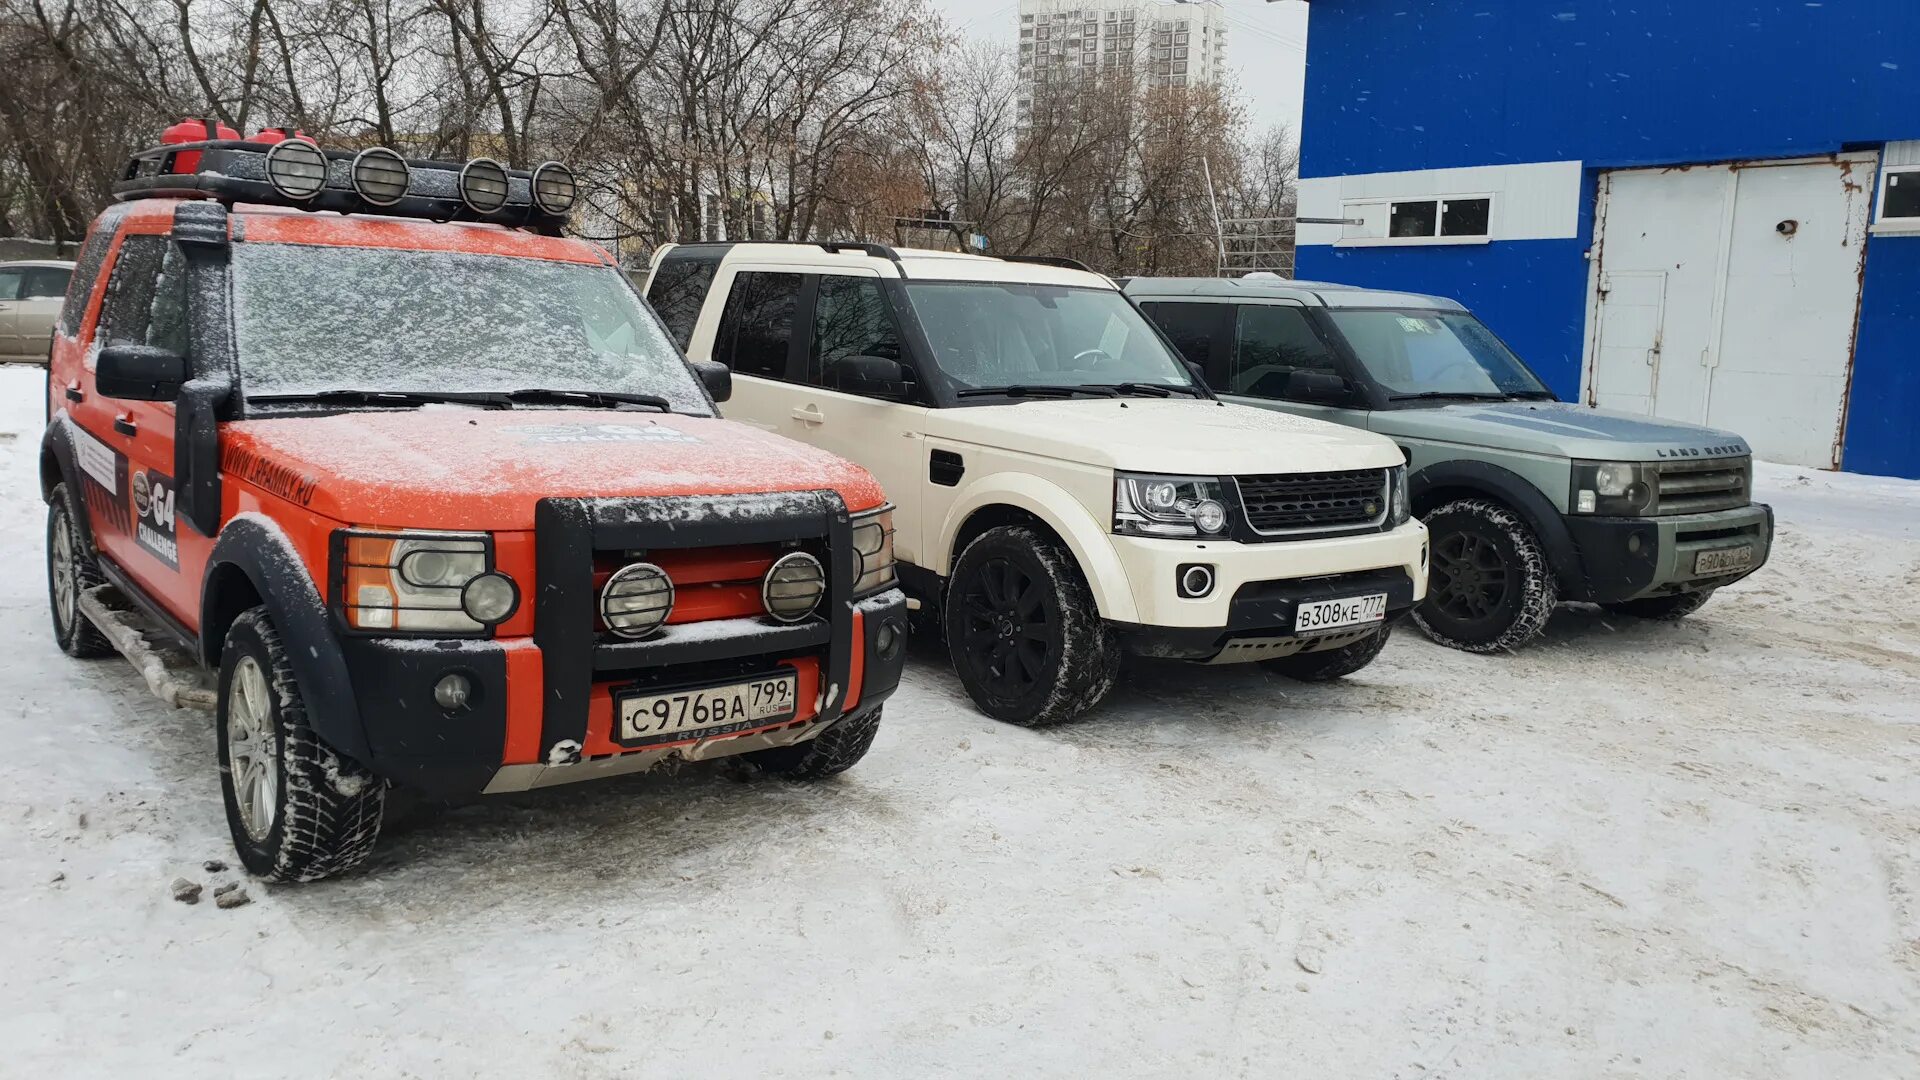 Land Rover Discovery 3 g4. Land Rover Discovery 3 Tuning. Ленд Ровер Дискавери 3 g4 Challenge. Land Rover Discovery 3 хаки. Свап дискавери 3